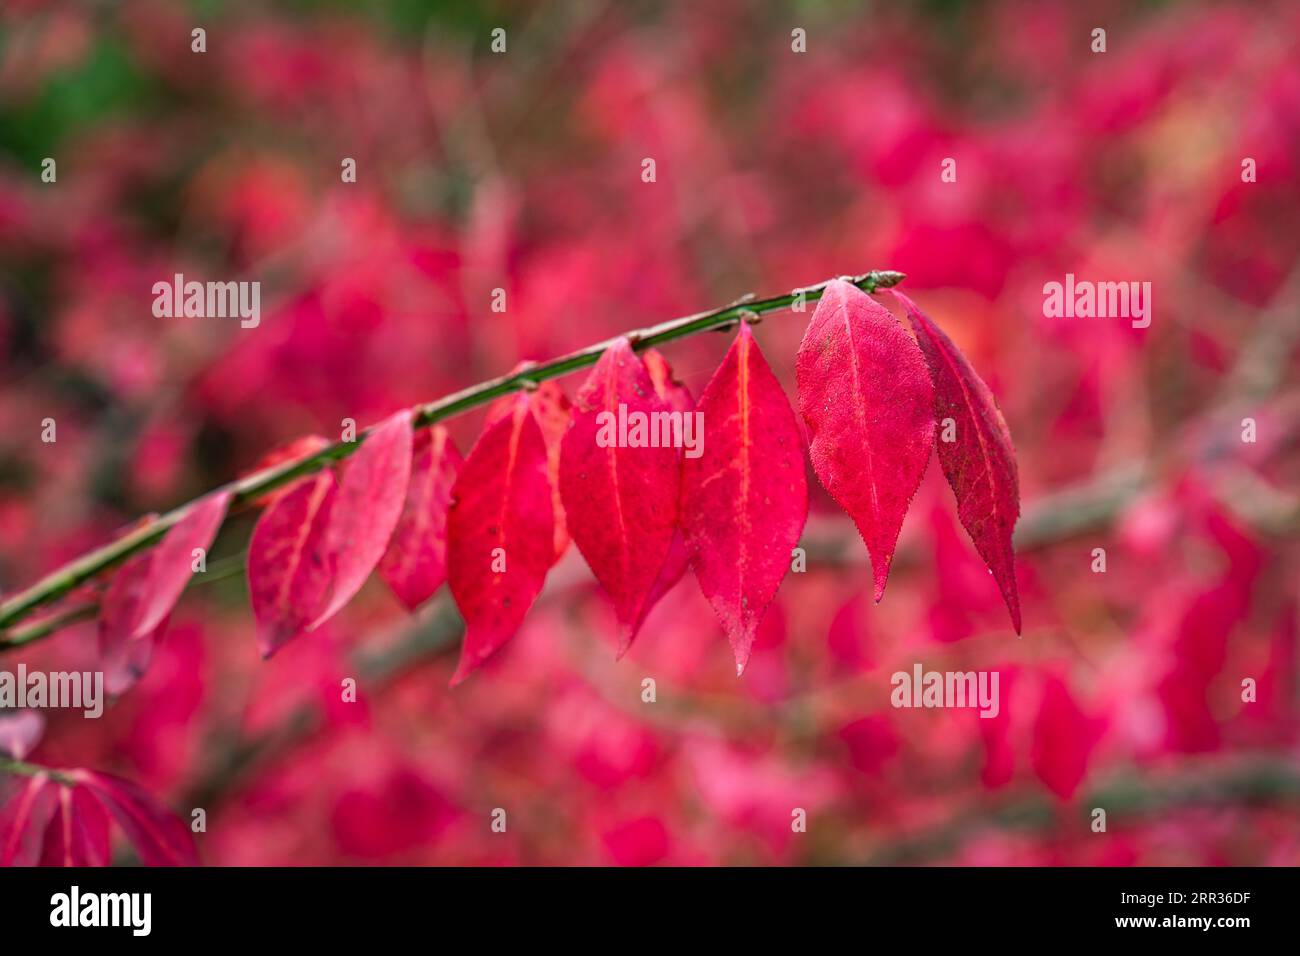 Euonymus alatus, known variously as winged spindle, winged euonymus, or burning bush, is a species of flowering plant in the family Celastraceae, nati Stock Photo